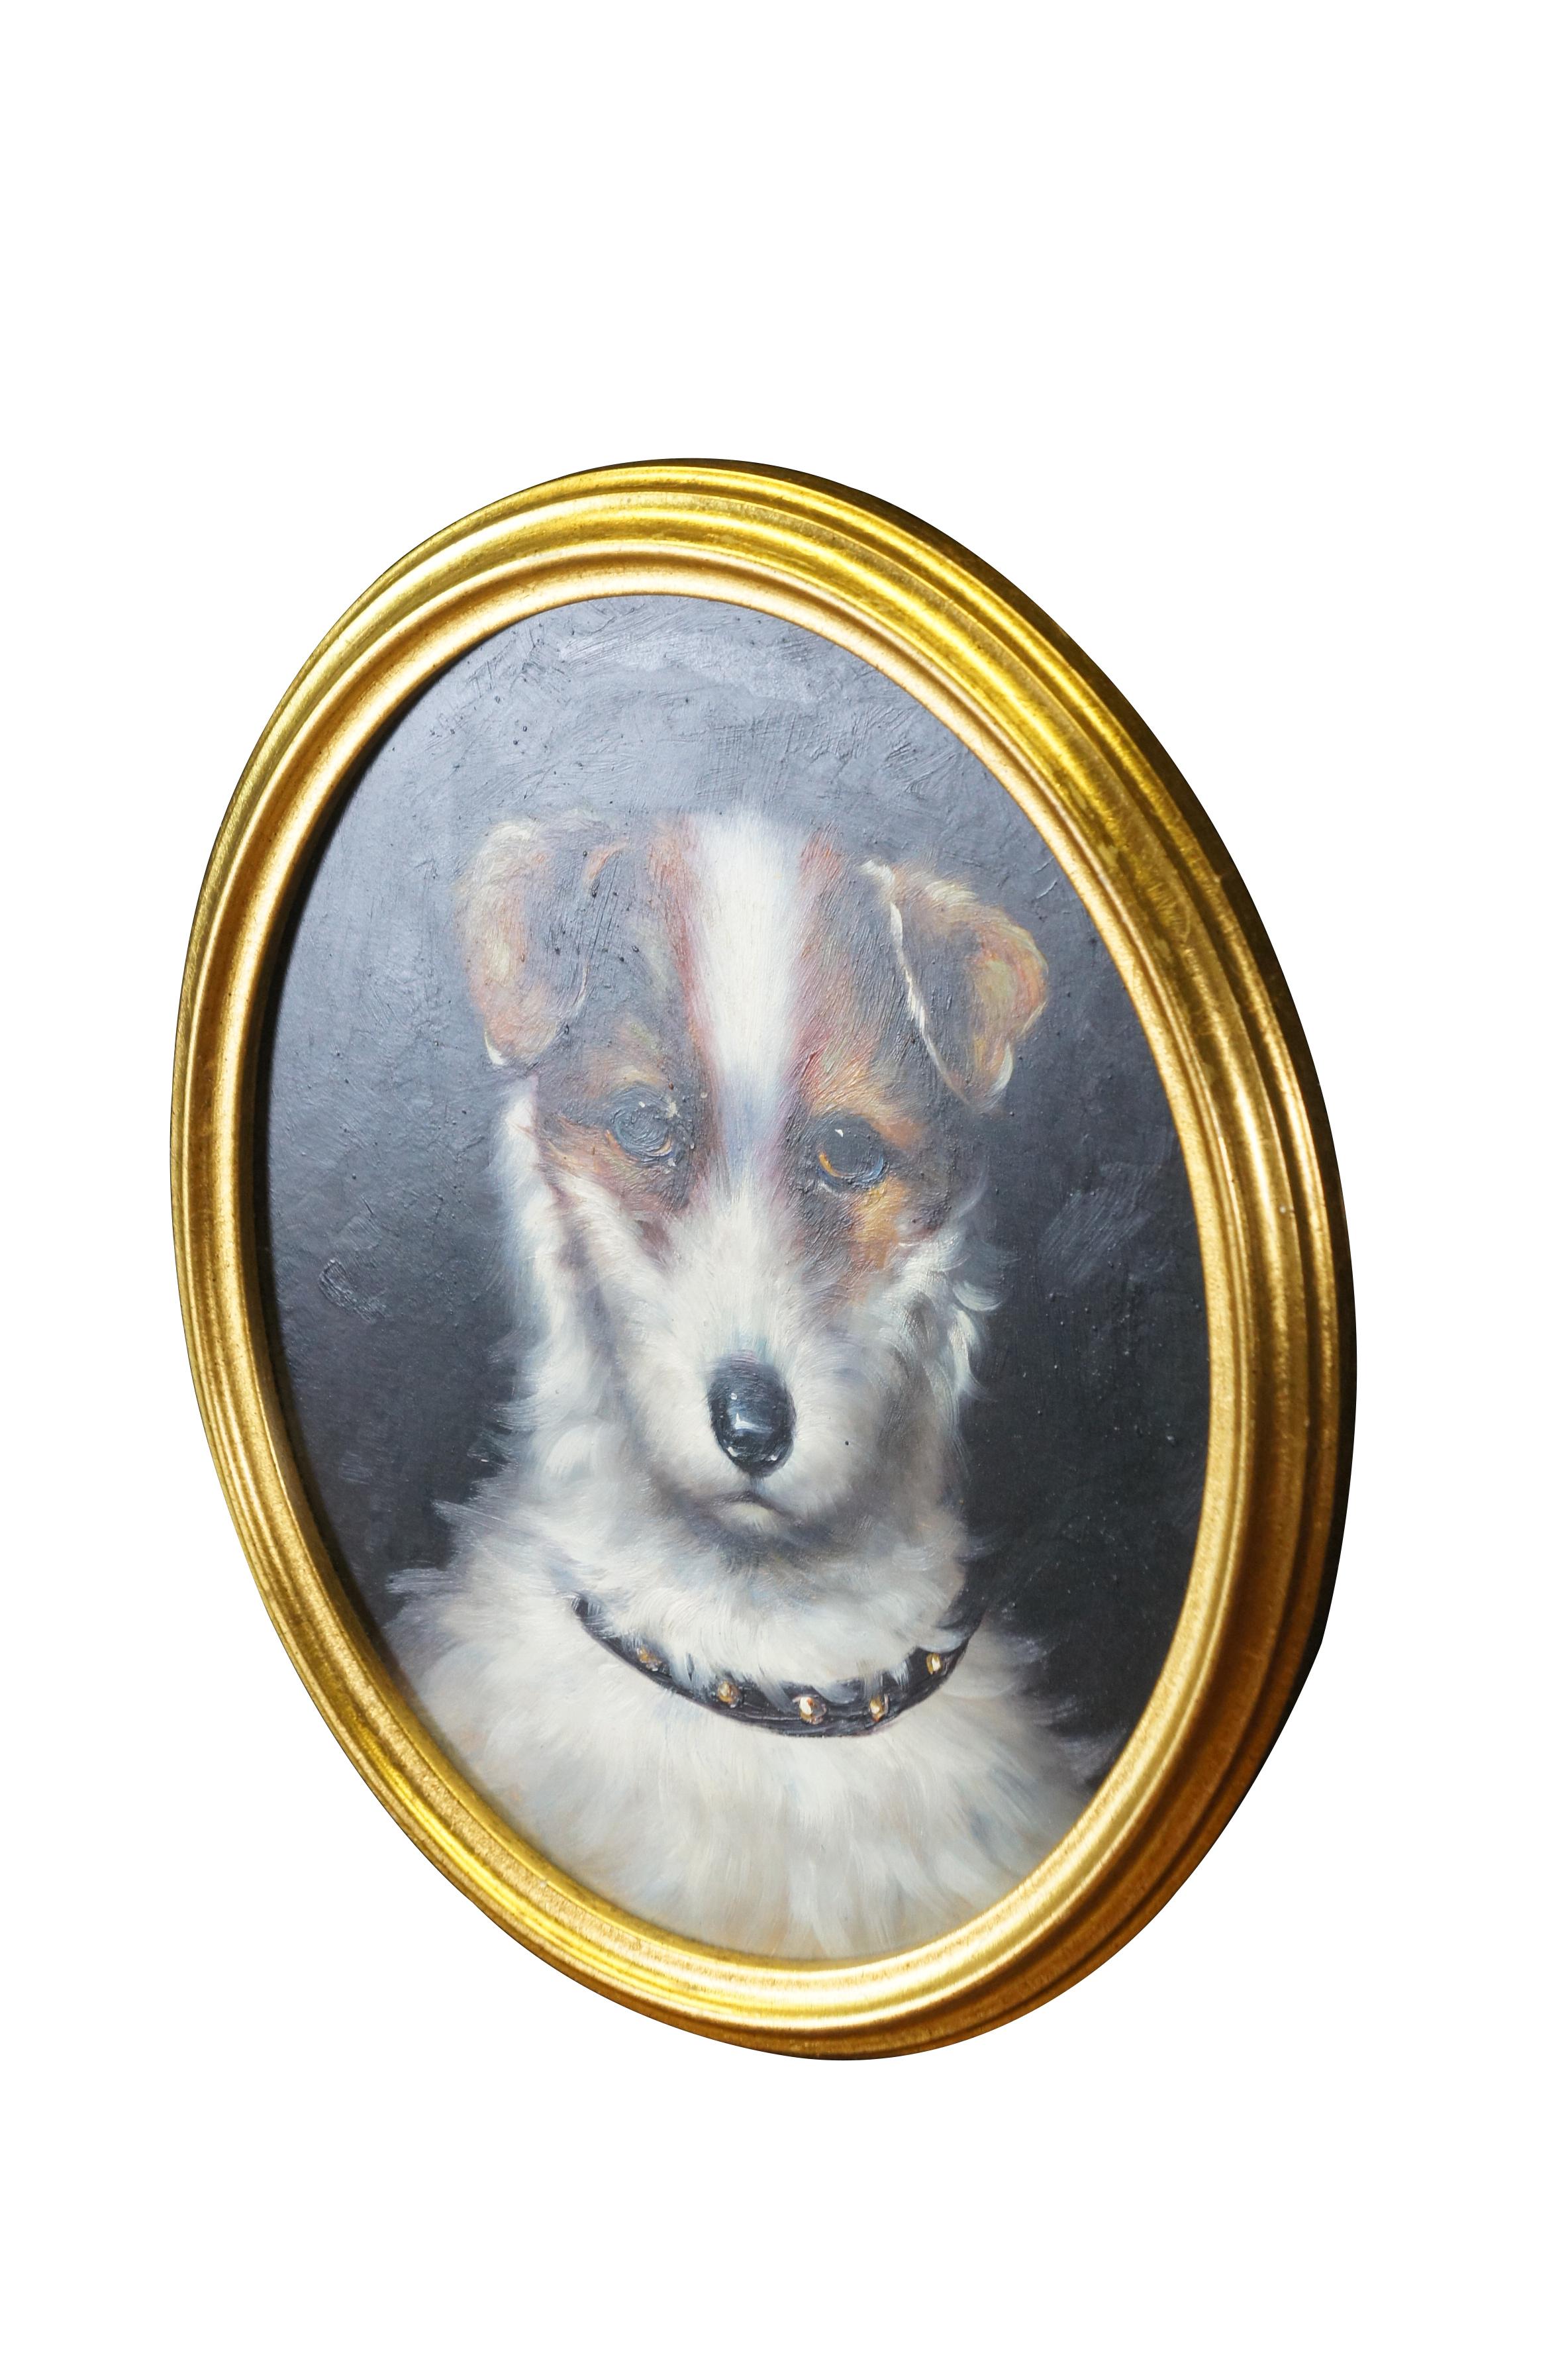 Vintage 20th Century Terrier Portrait Oil Painting on Board Gold Frame Realism  In Good Condition For Sale In Dayton, OH